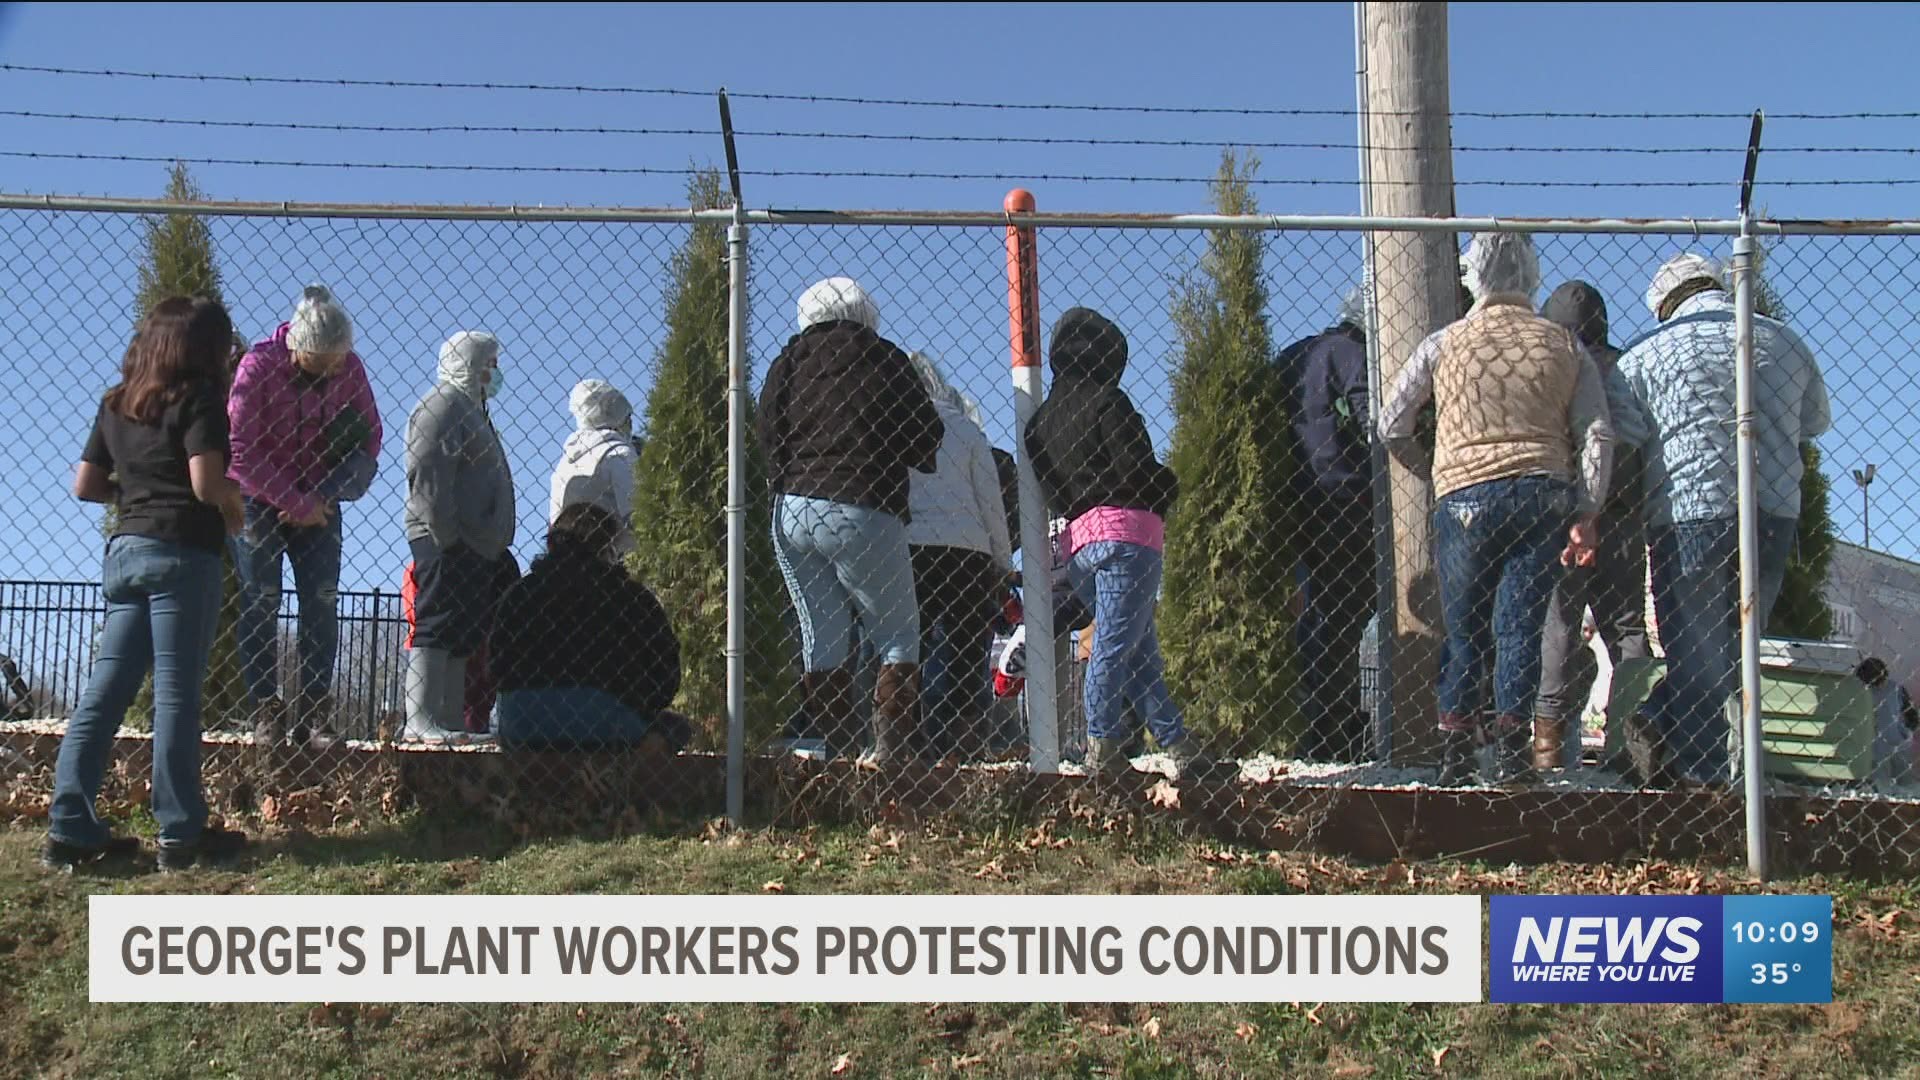 These workers say they fear the company isn’t doing enough to protect them during the ongoing pandemic.